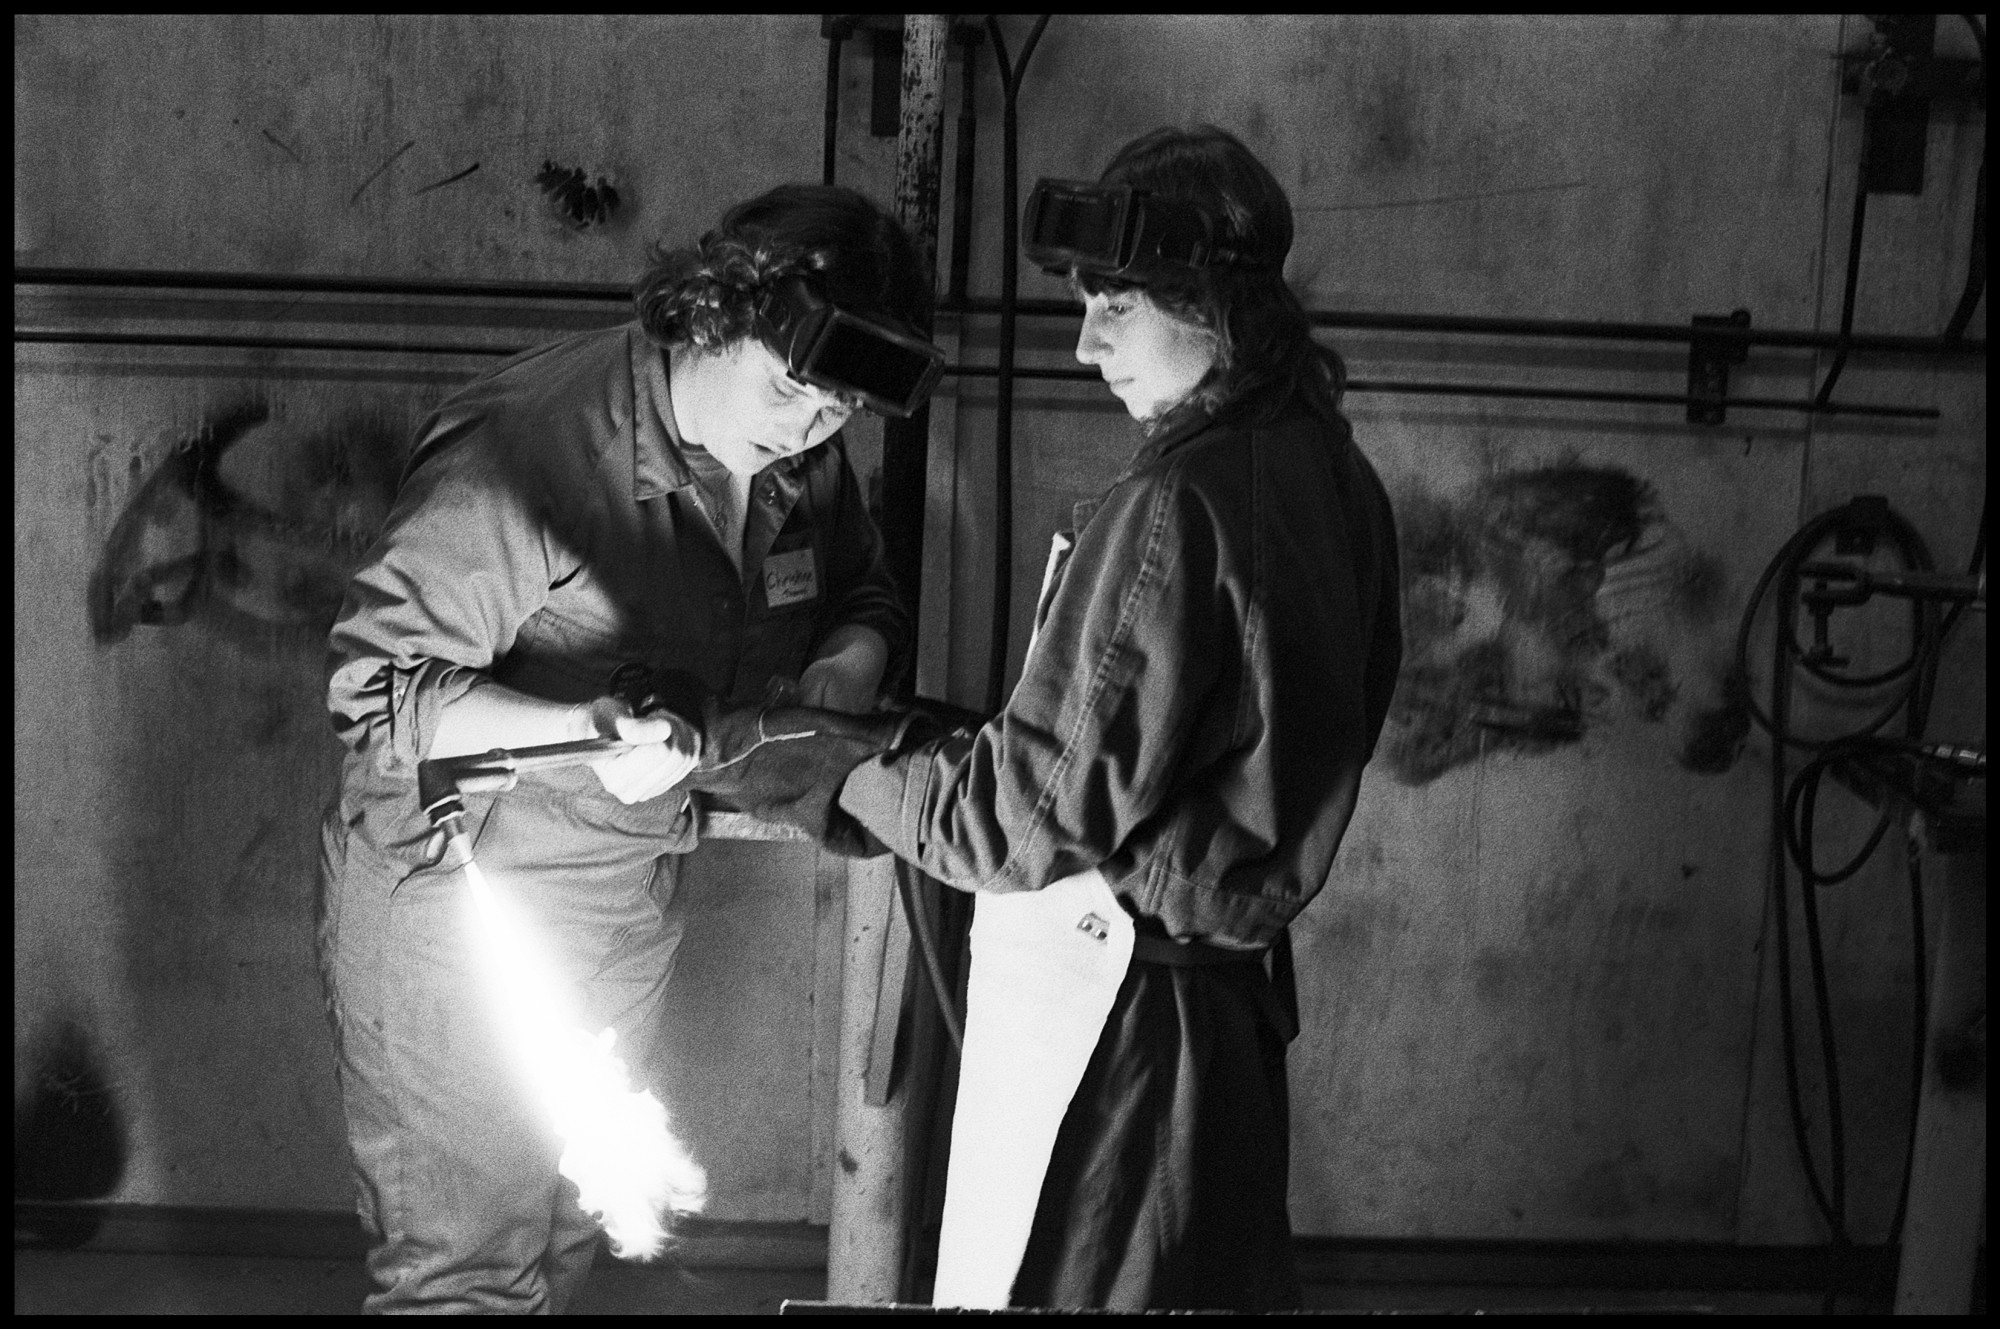 Ruth Maddison, <em>Trade workshop for girls, Preston TAFE</em>, 1984, pigment print from scanned negative, 18.6 x 28 cm (image size). Courtesy of the artist and the Centre for Contemporary Photography.